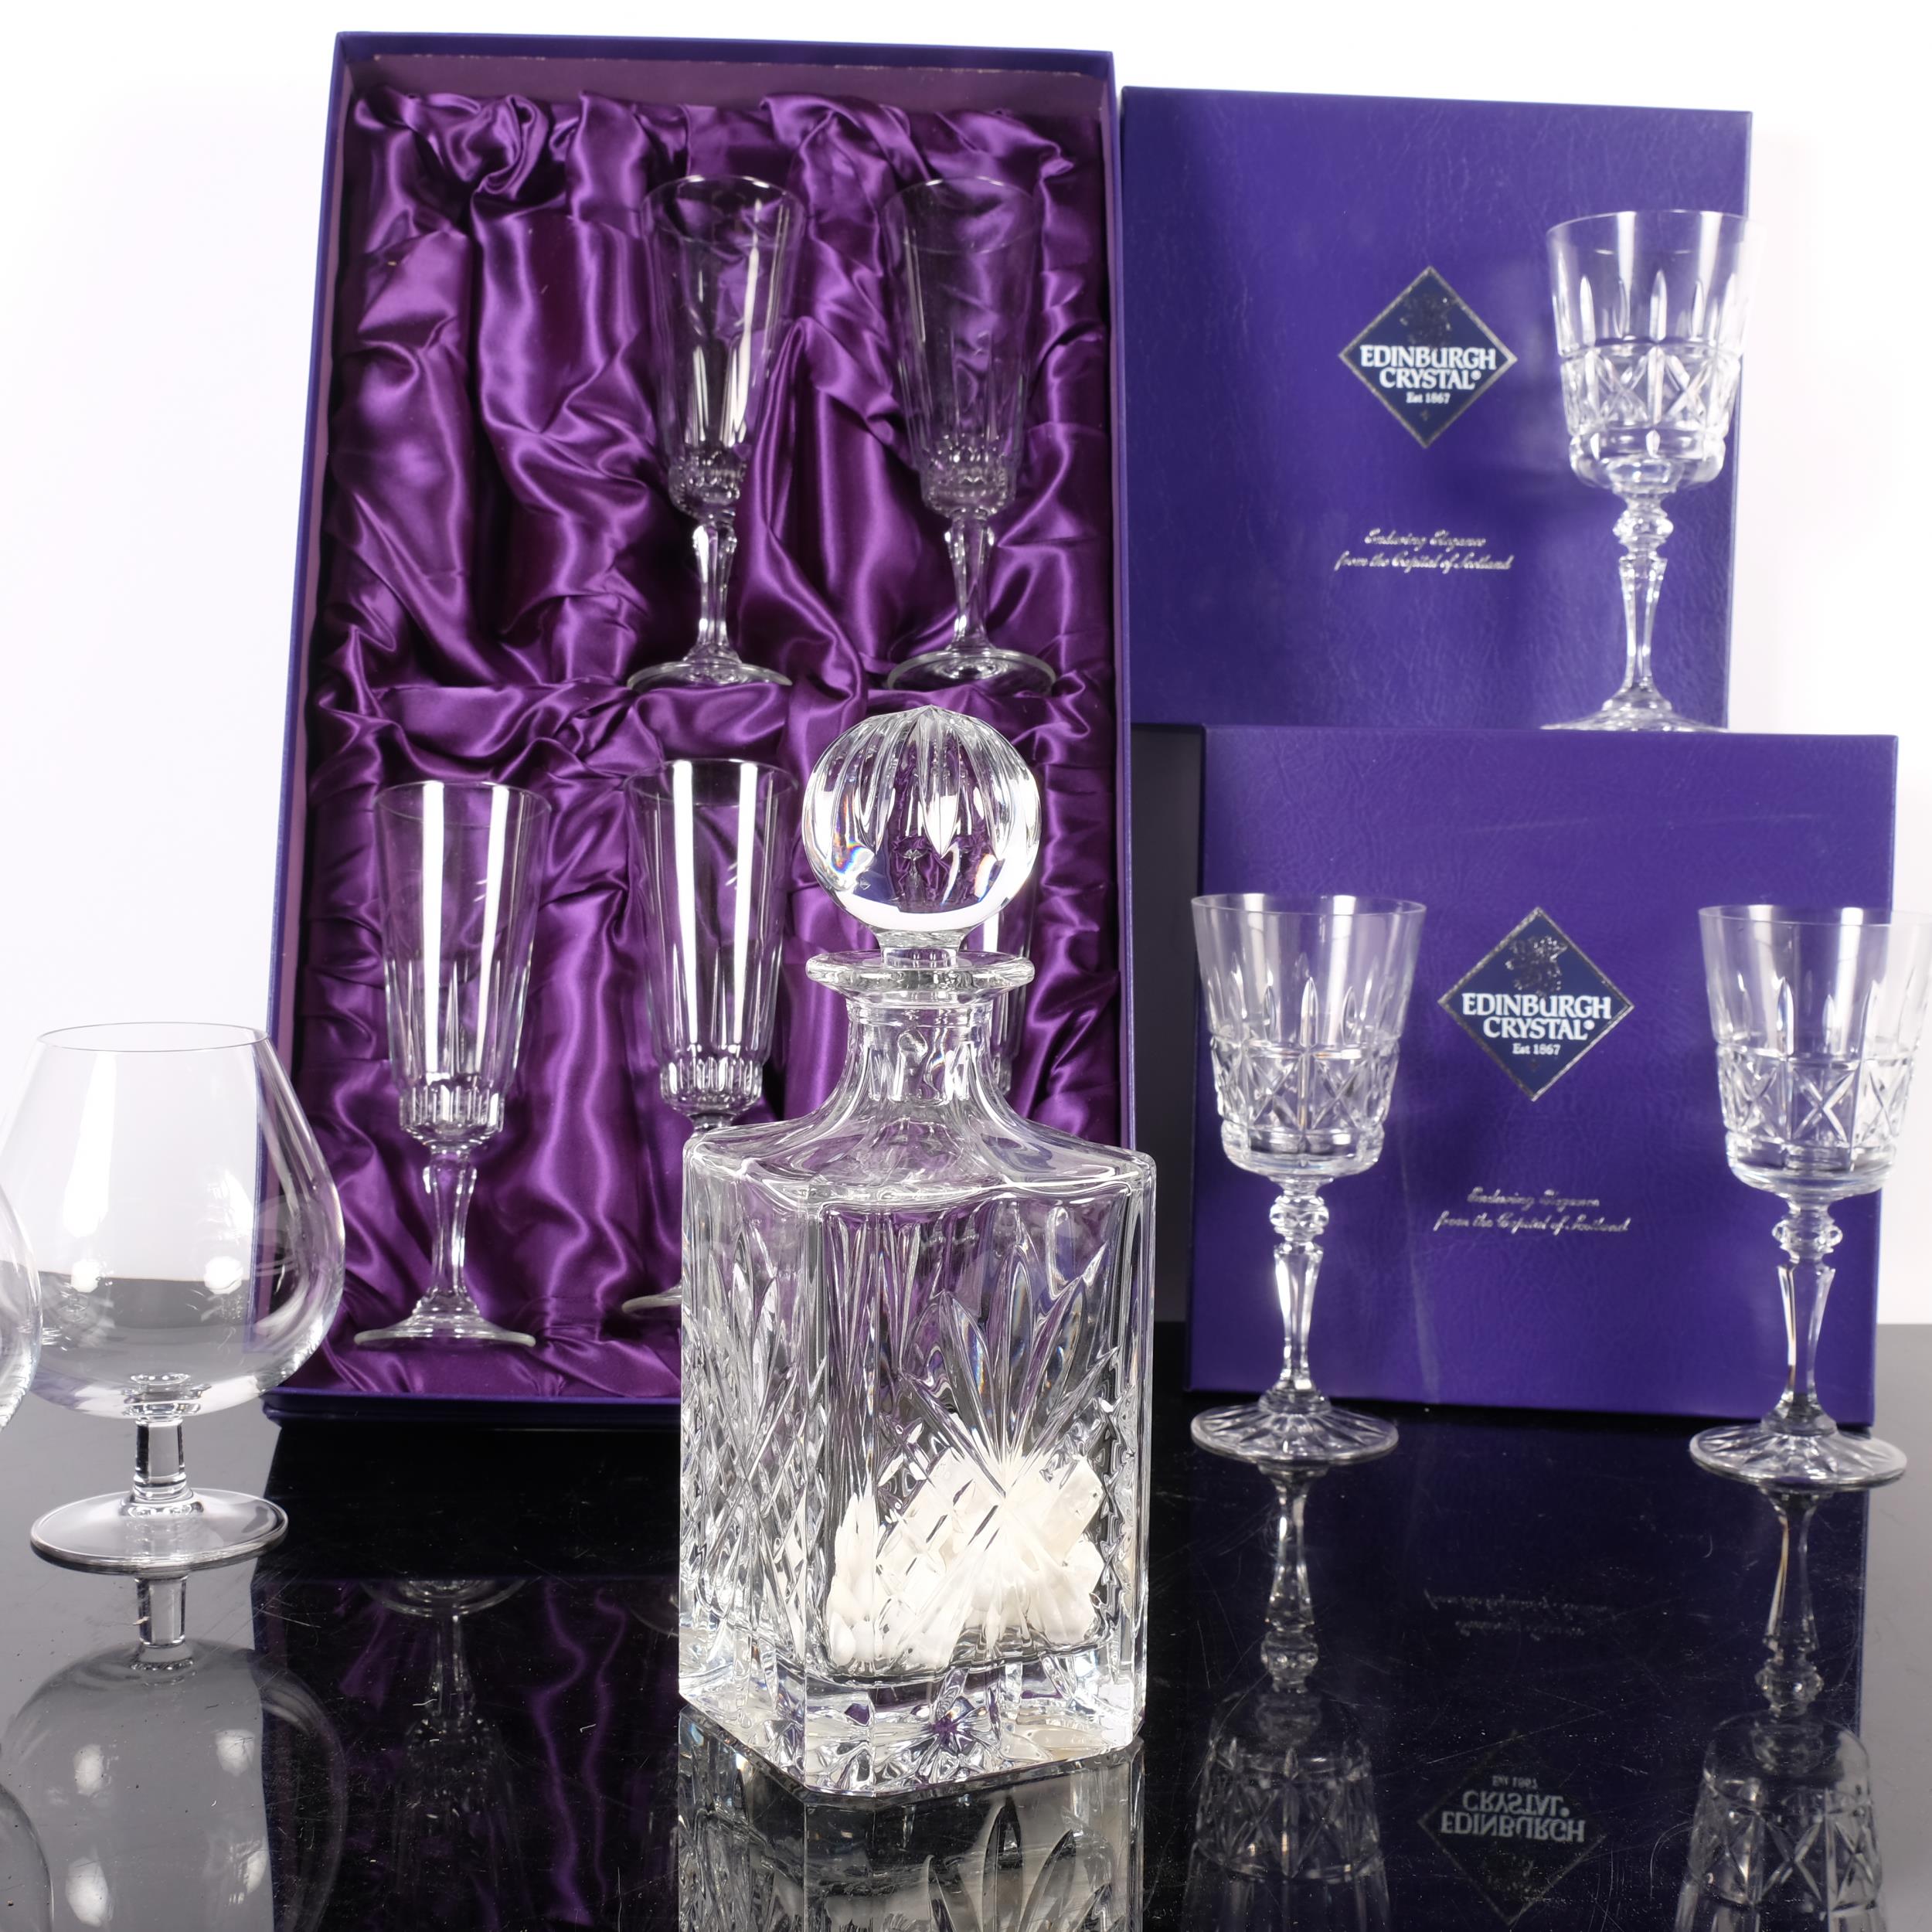 A quantity of Edinburgh Crystal and Royal Scott Crystal glassware, various faceted wine glasses, - Image 2 of 2